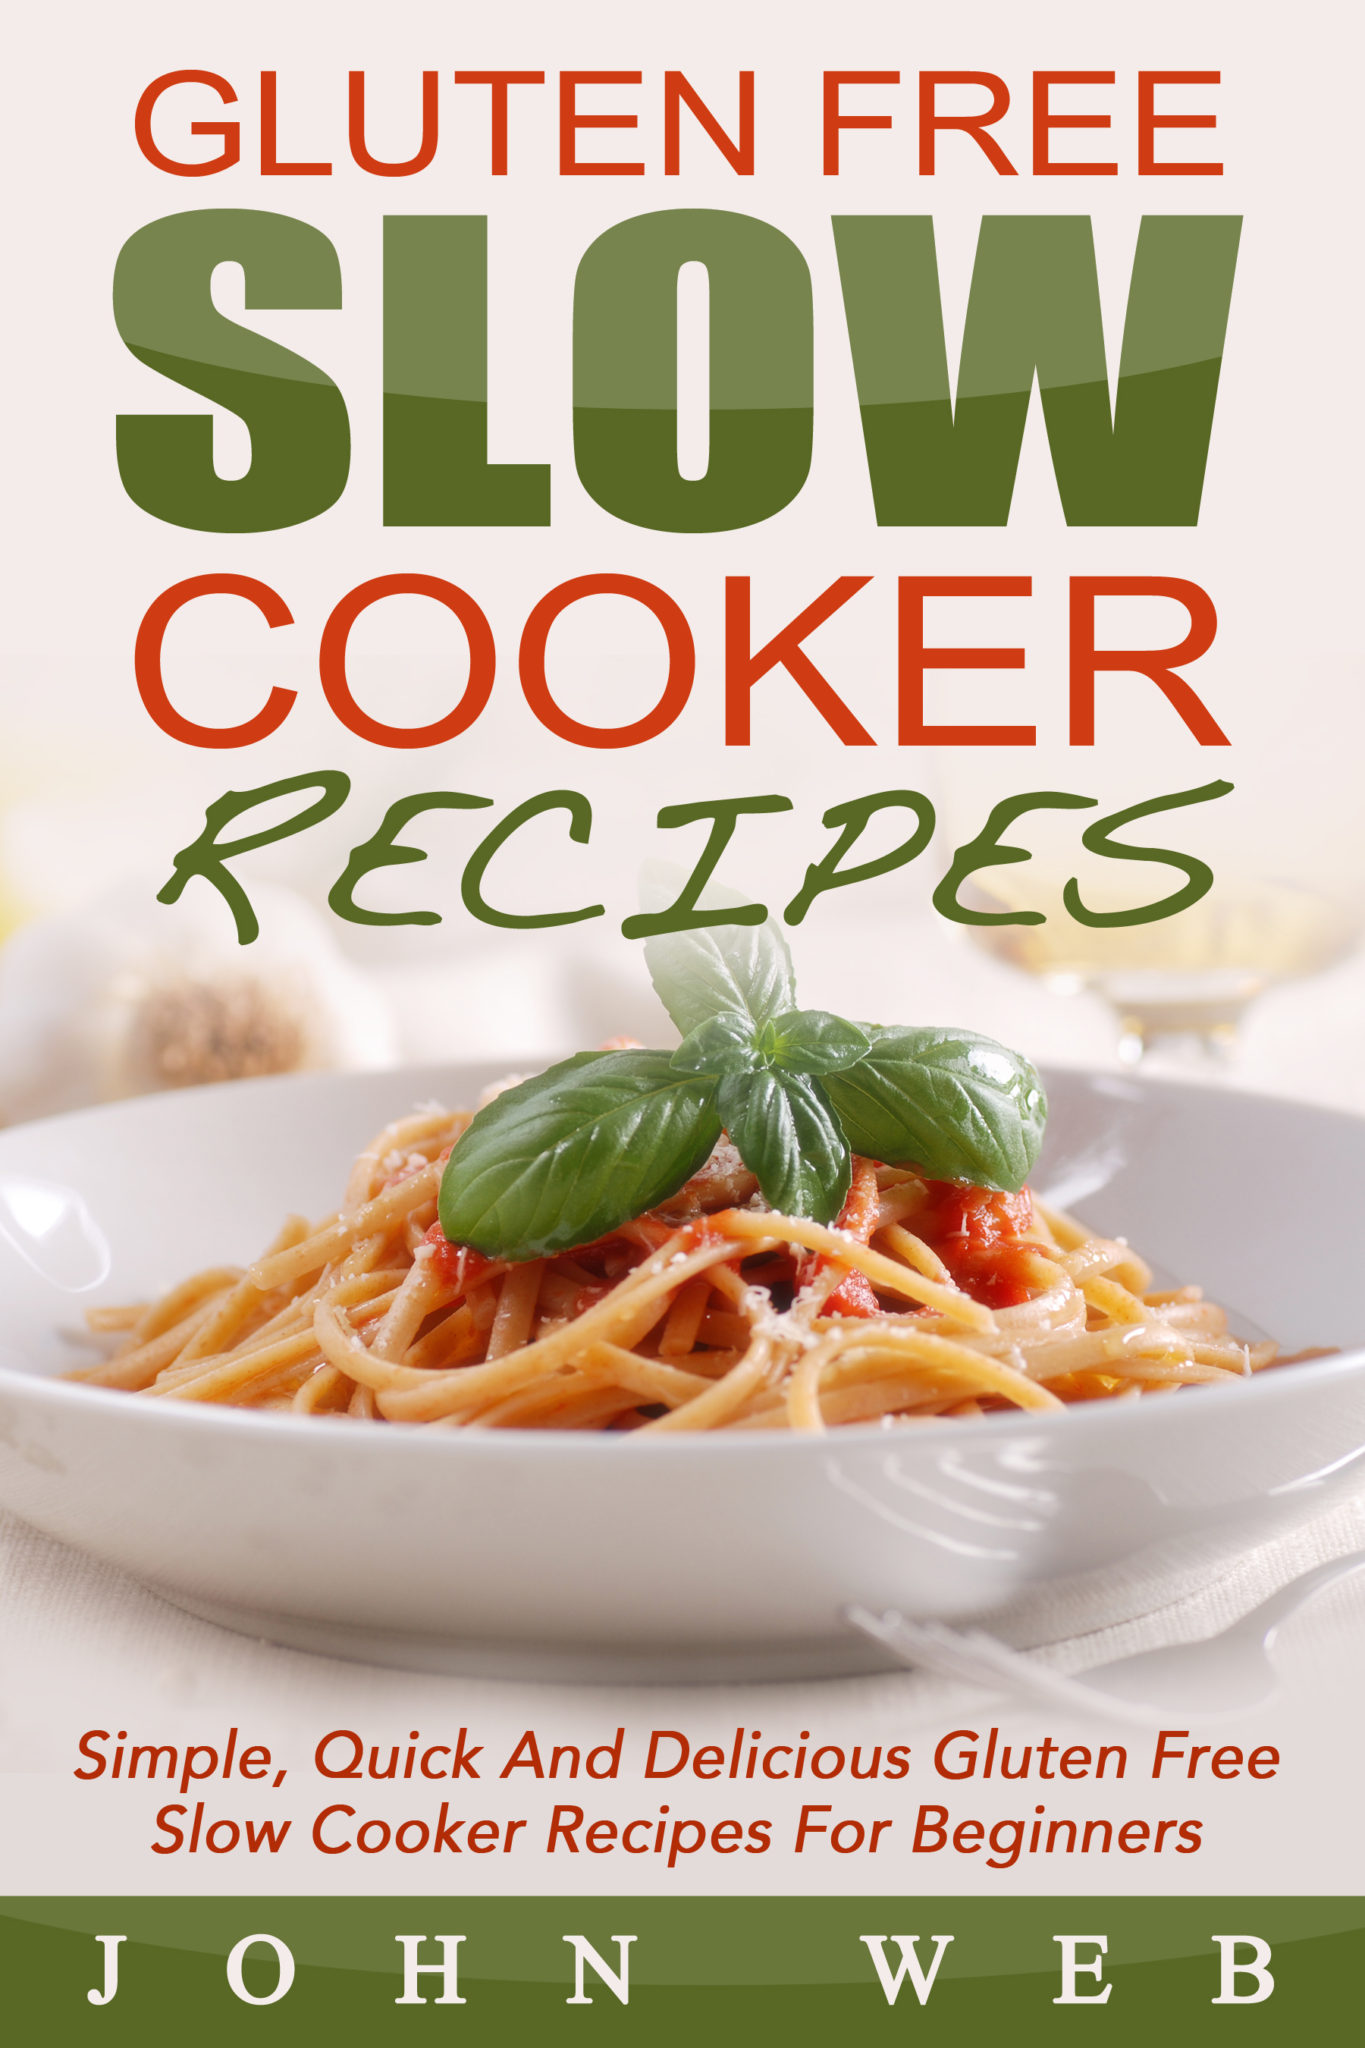 Gluten Free Slow Cooker Recipes – Simple, Quick And Delicious Gluten Free Slow Cooker Recipes For Beginners by John Web